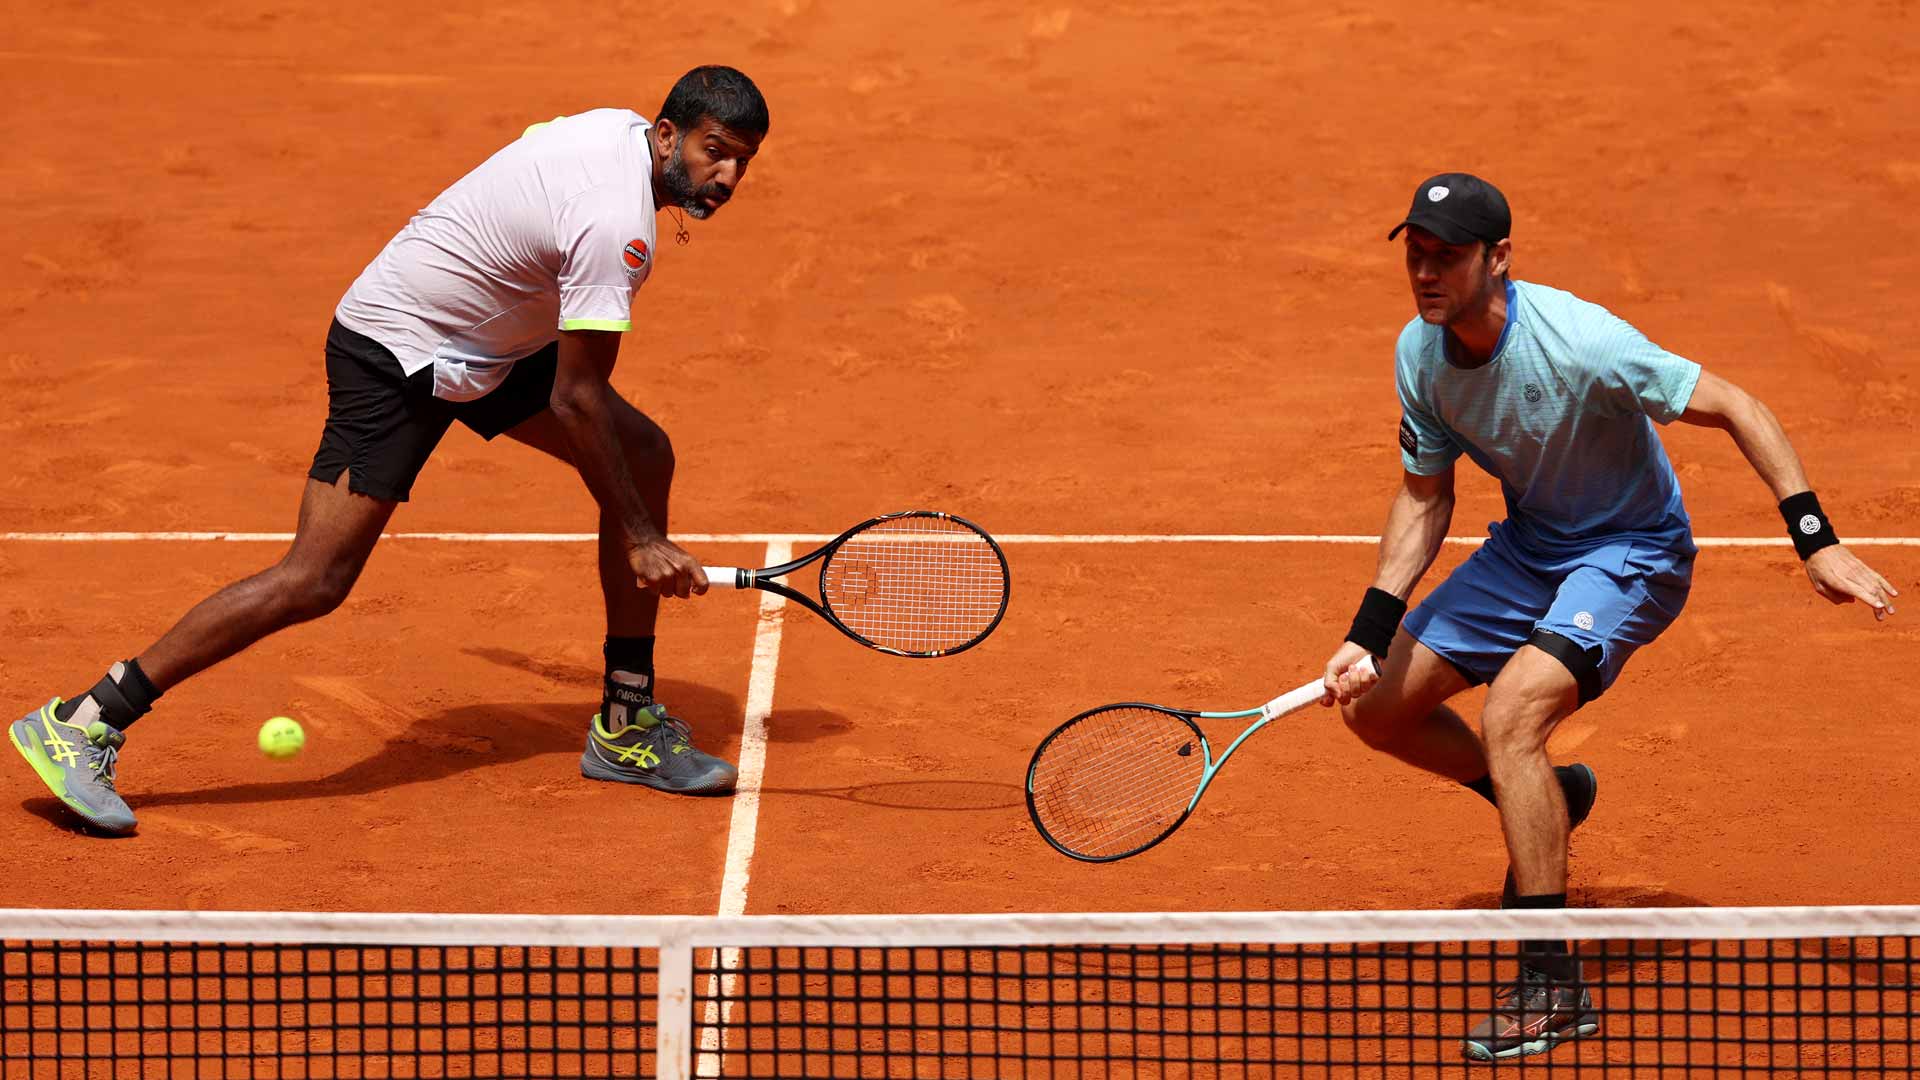 Rohan Bopanna (left) and Matthew Ebden at the ATP Masters 1000 event in Madrid.